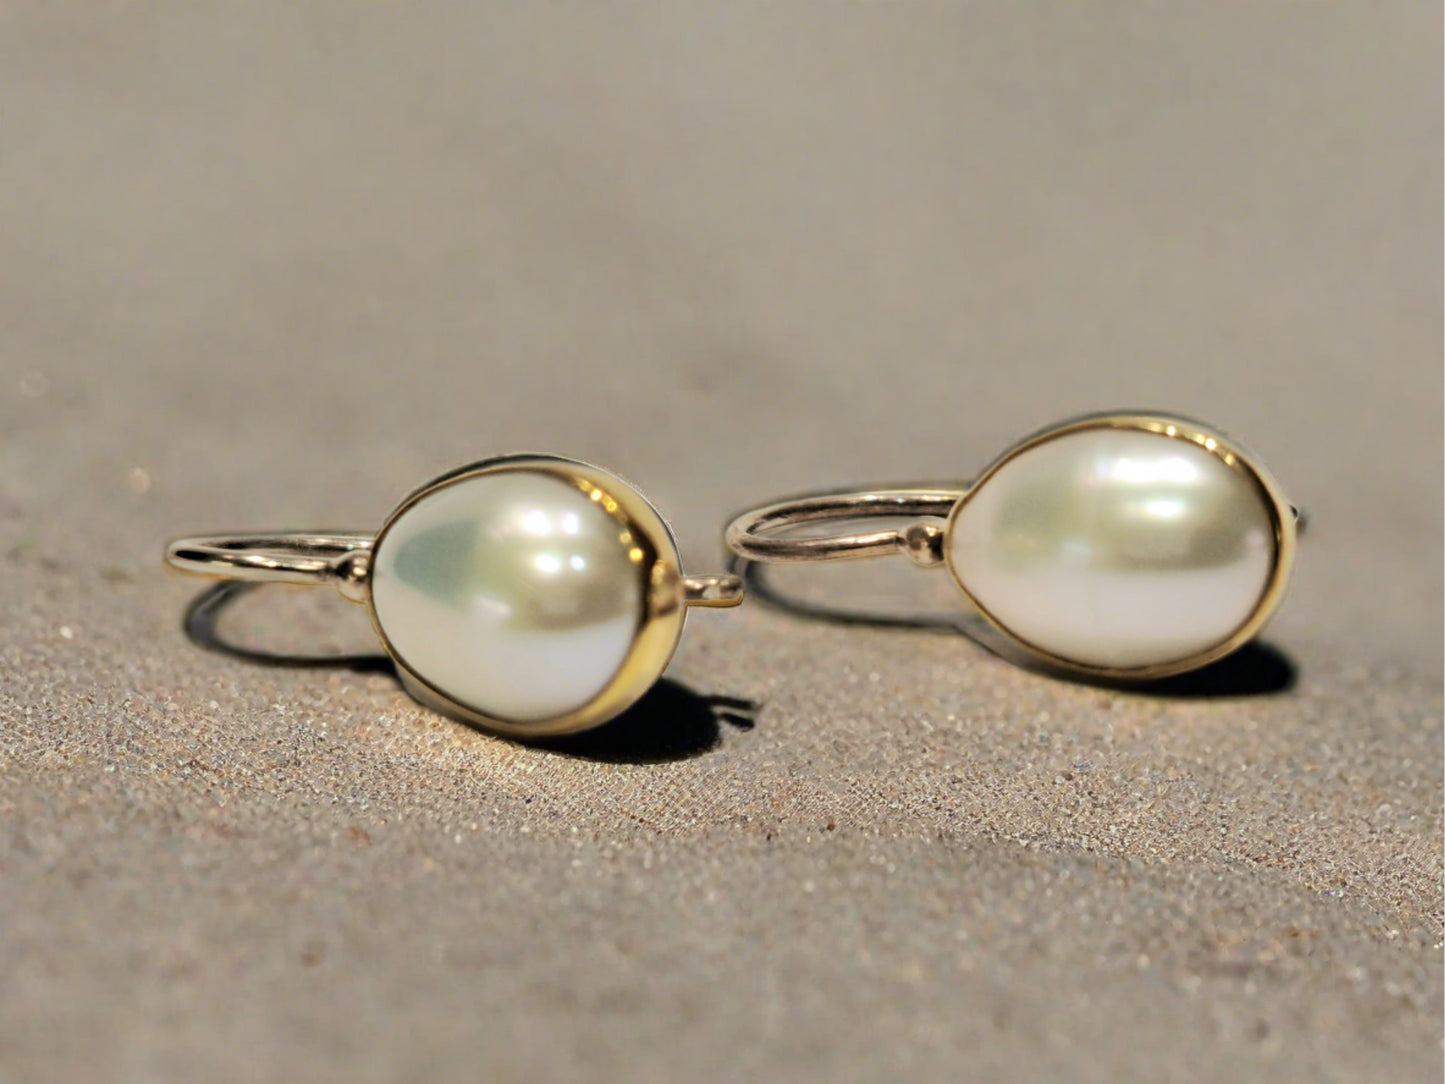 18K gold and silver earrings with oval pearls